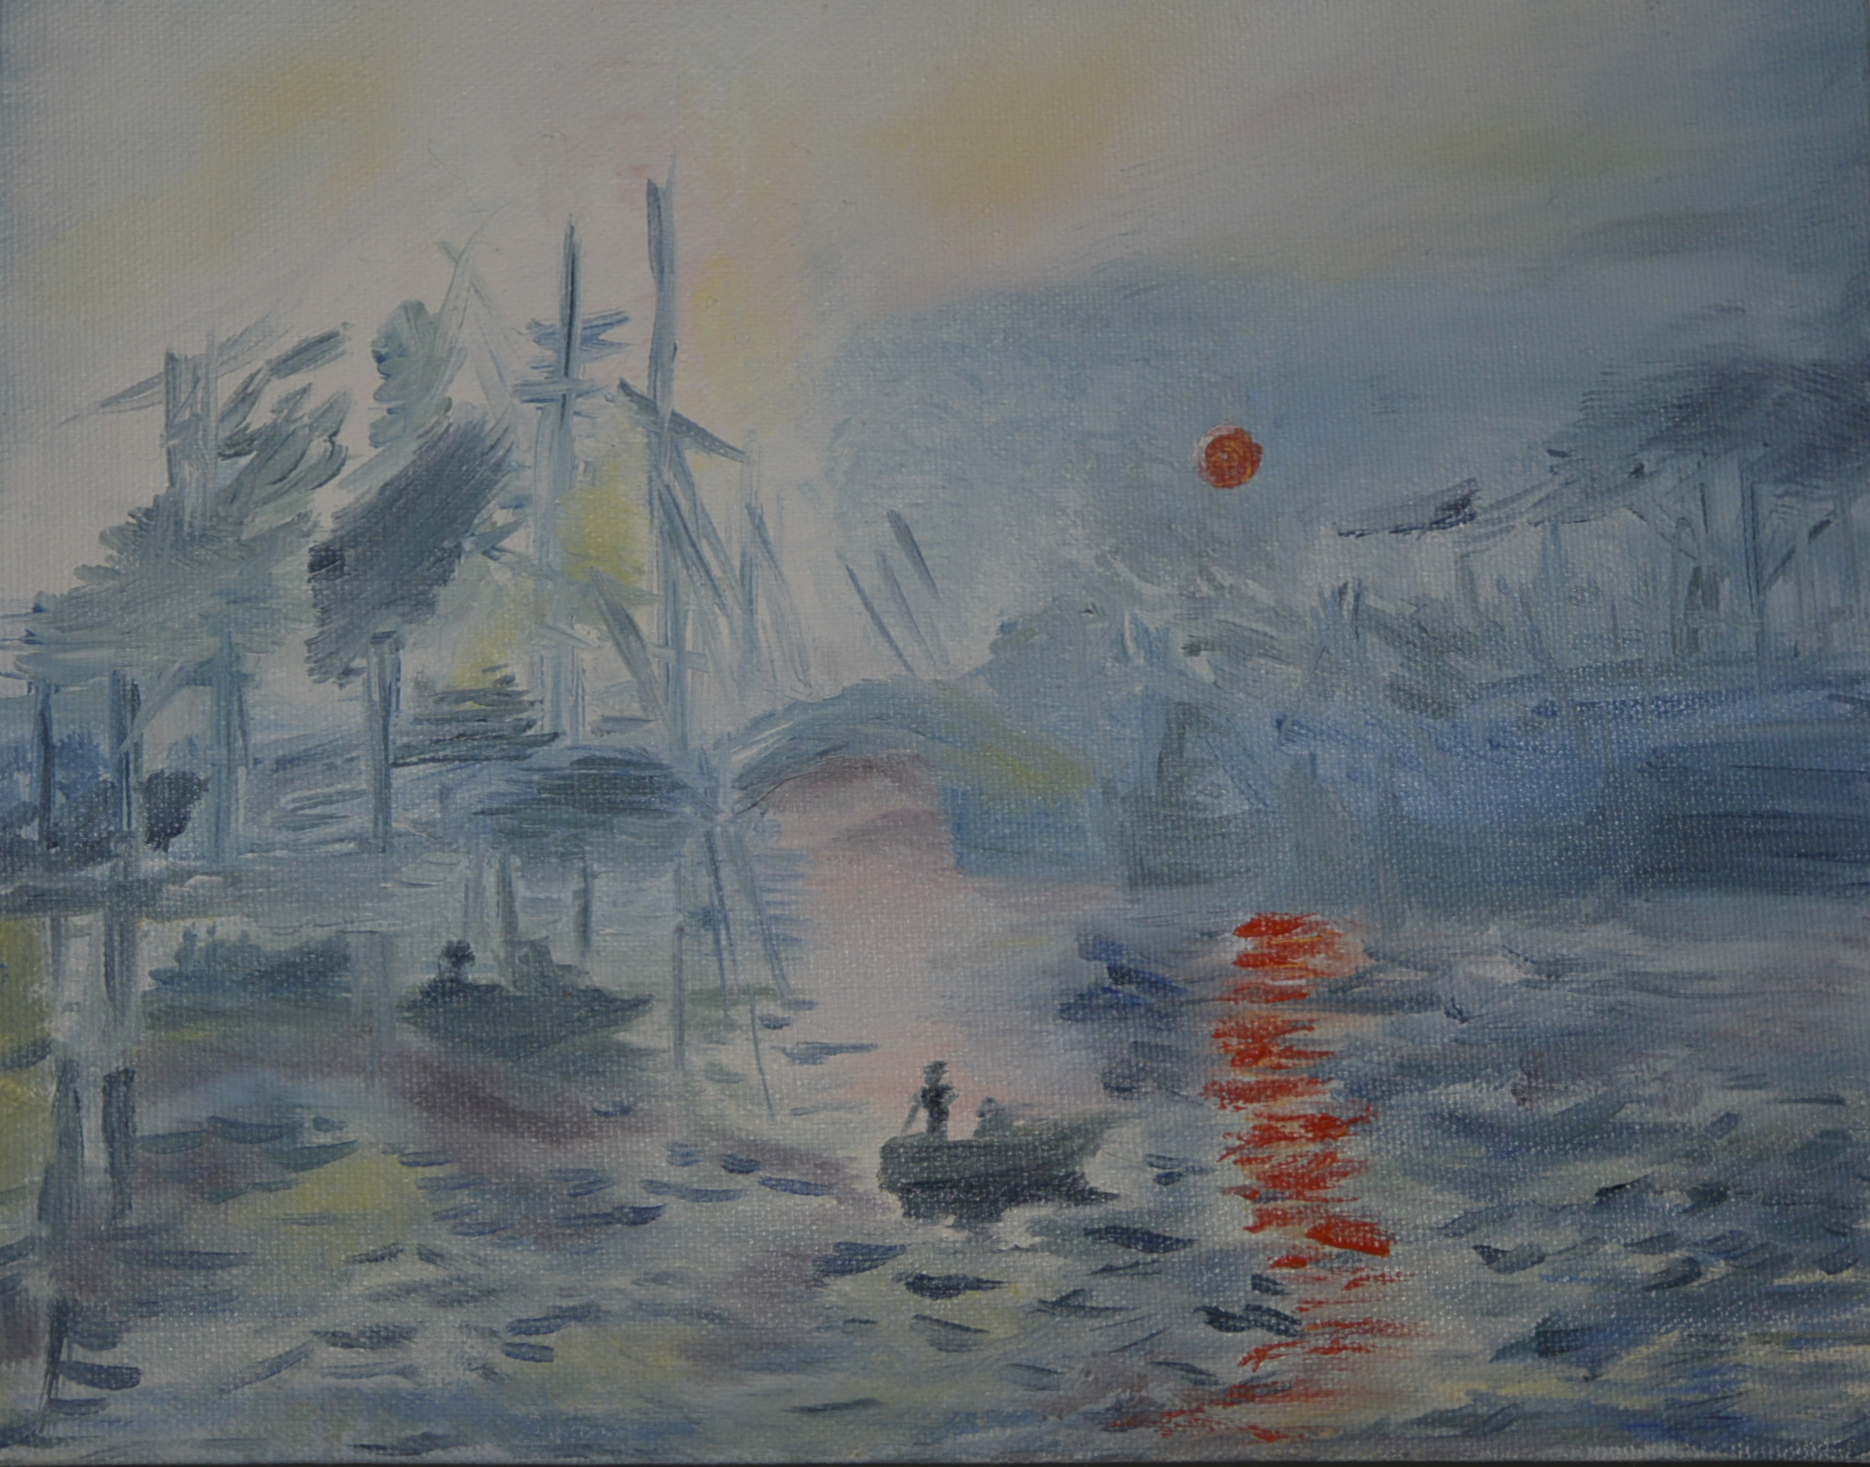 Study about Monet